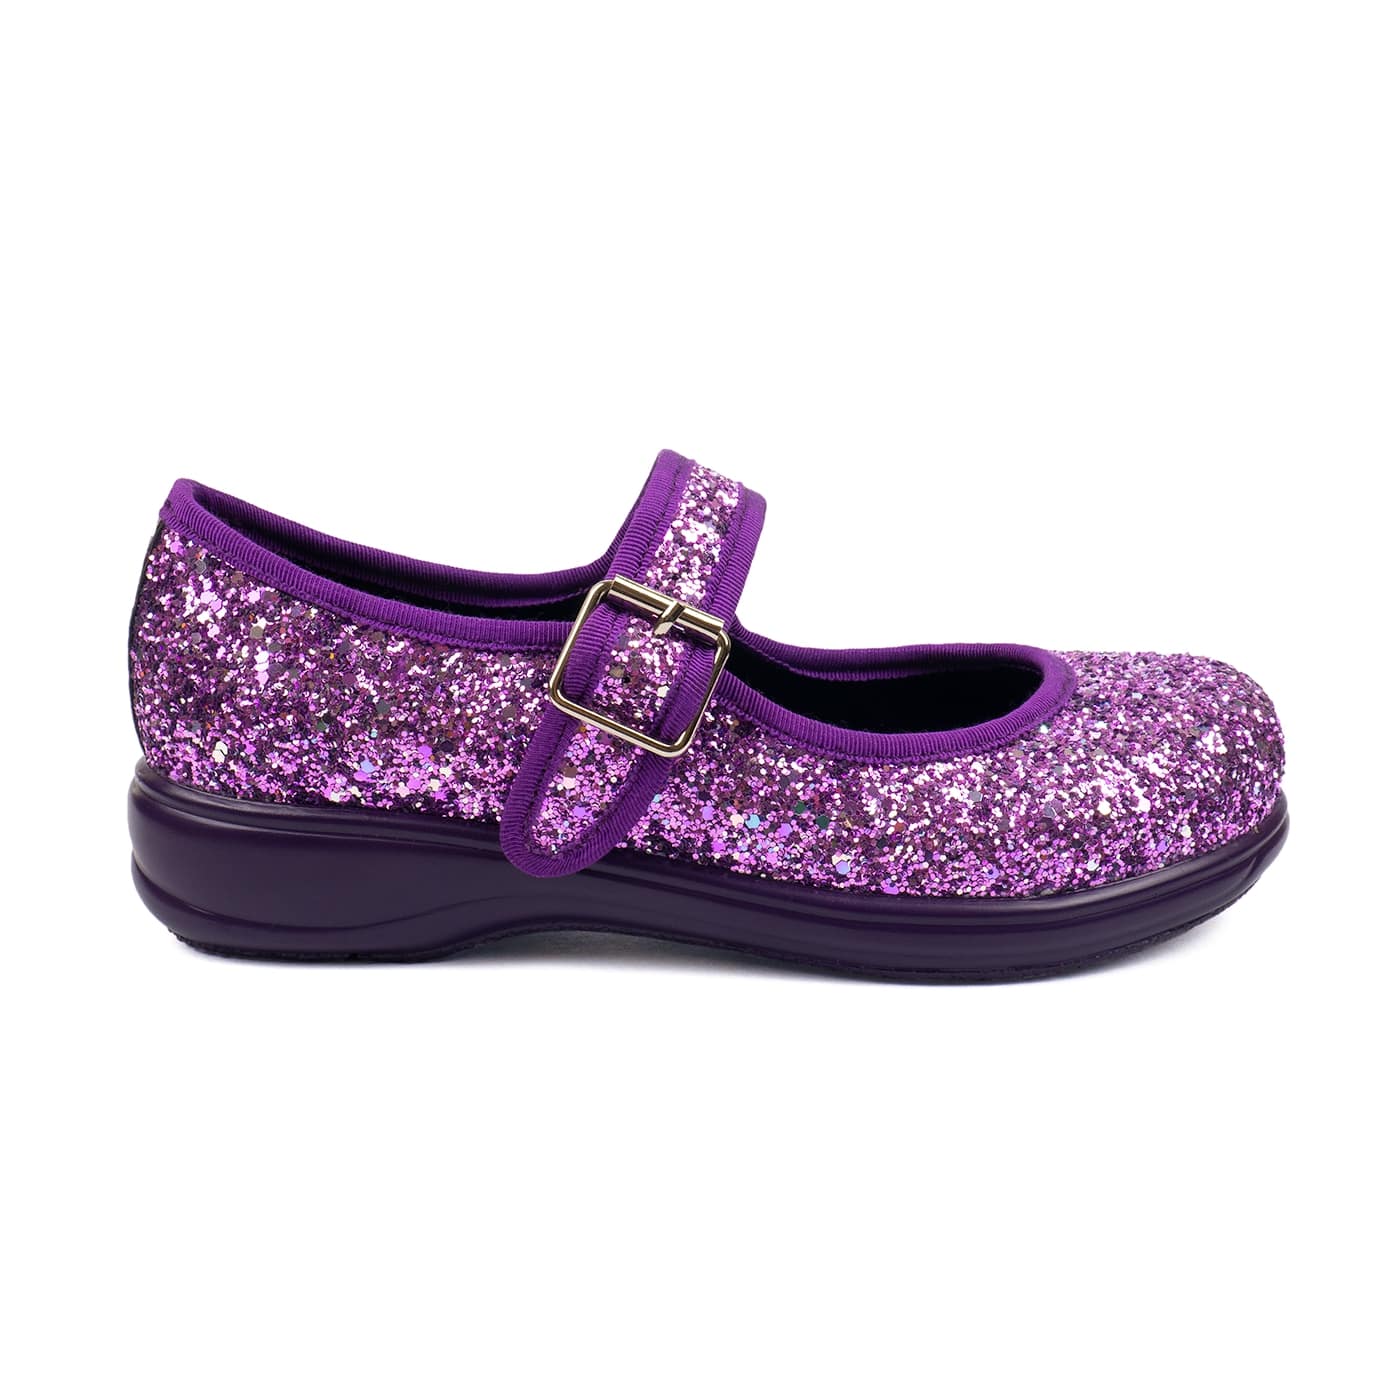 Amethyst Mary Janes by RainbowsAndFairies.com (Purple Glitter - Sparkle - Shoes - Buckle Up - Lilac) - SKU: FW_MARYJ_AMTHS_ORG - Pic 04